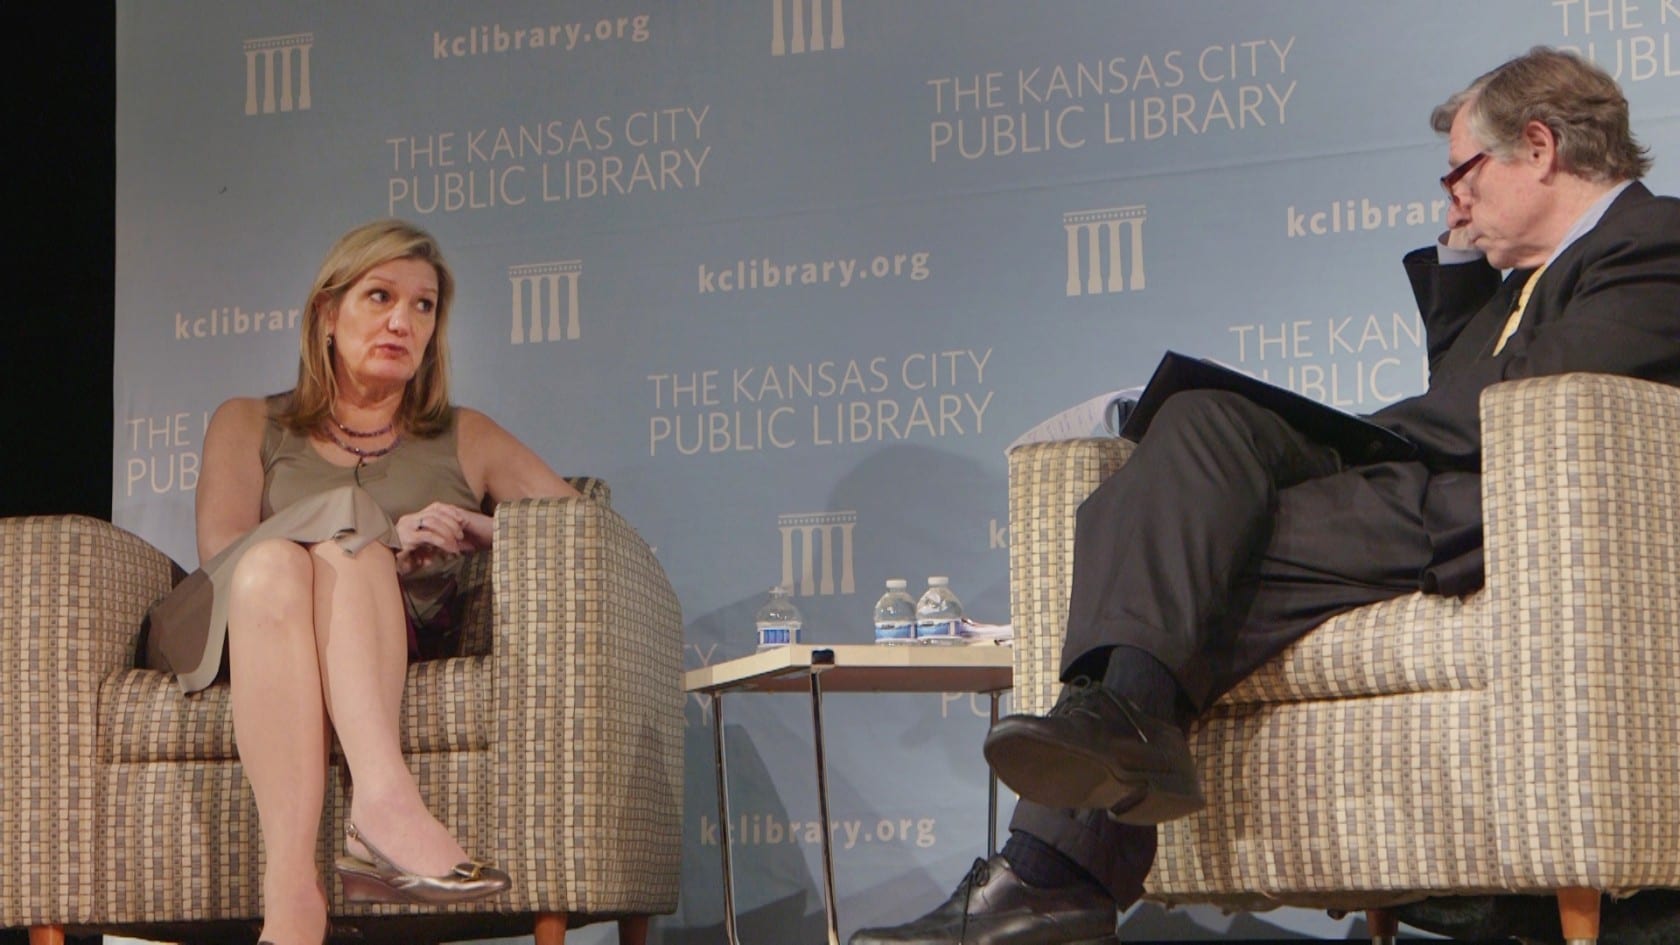 Kate Walsh talks with KCPL director Crosby Kemper III at an event at the Plaza Library.